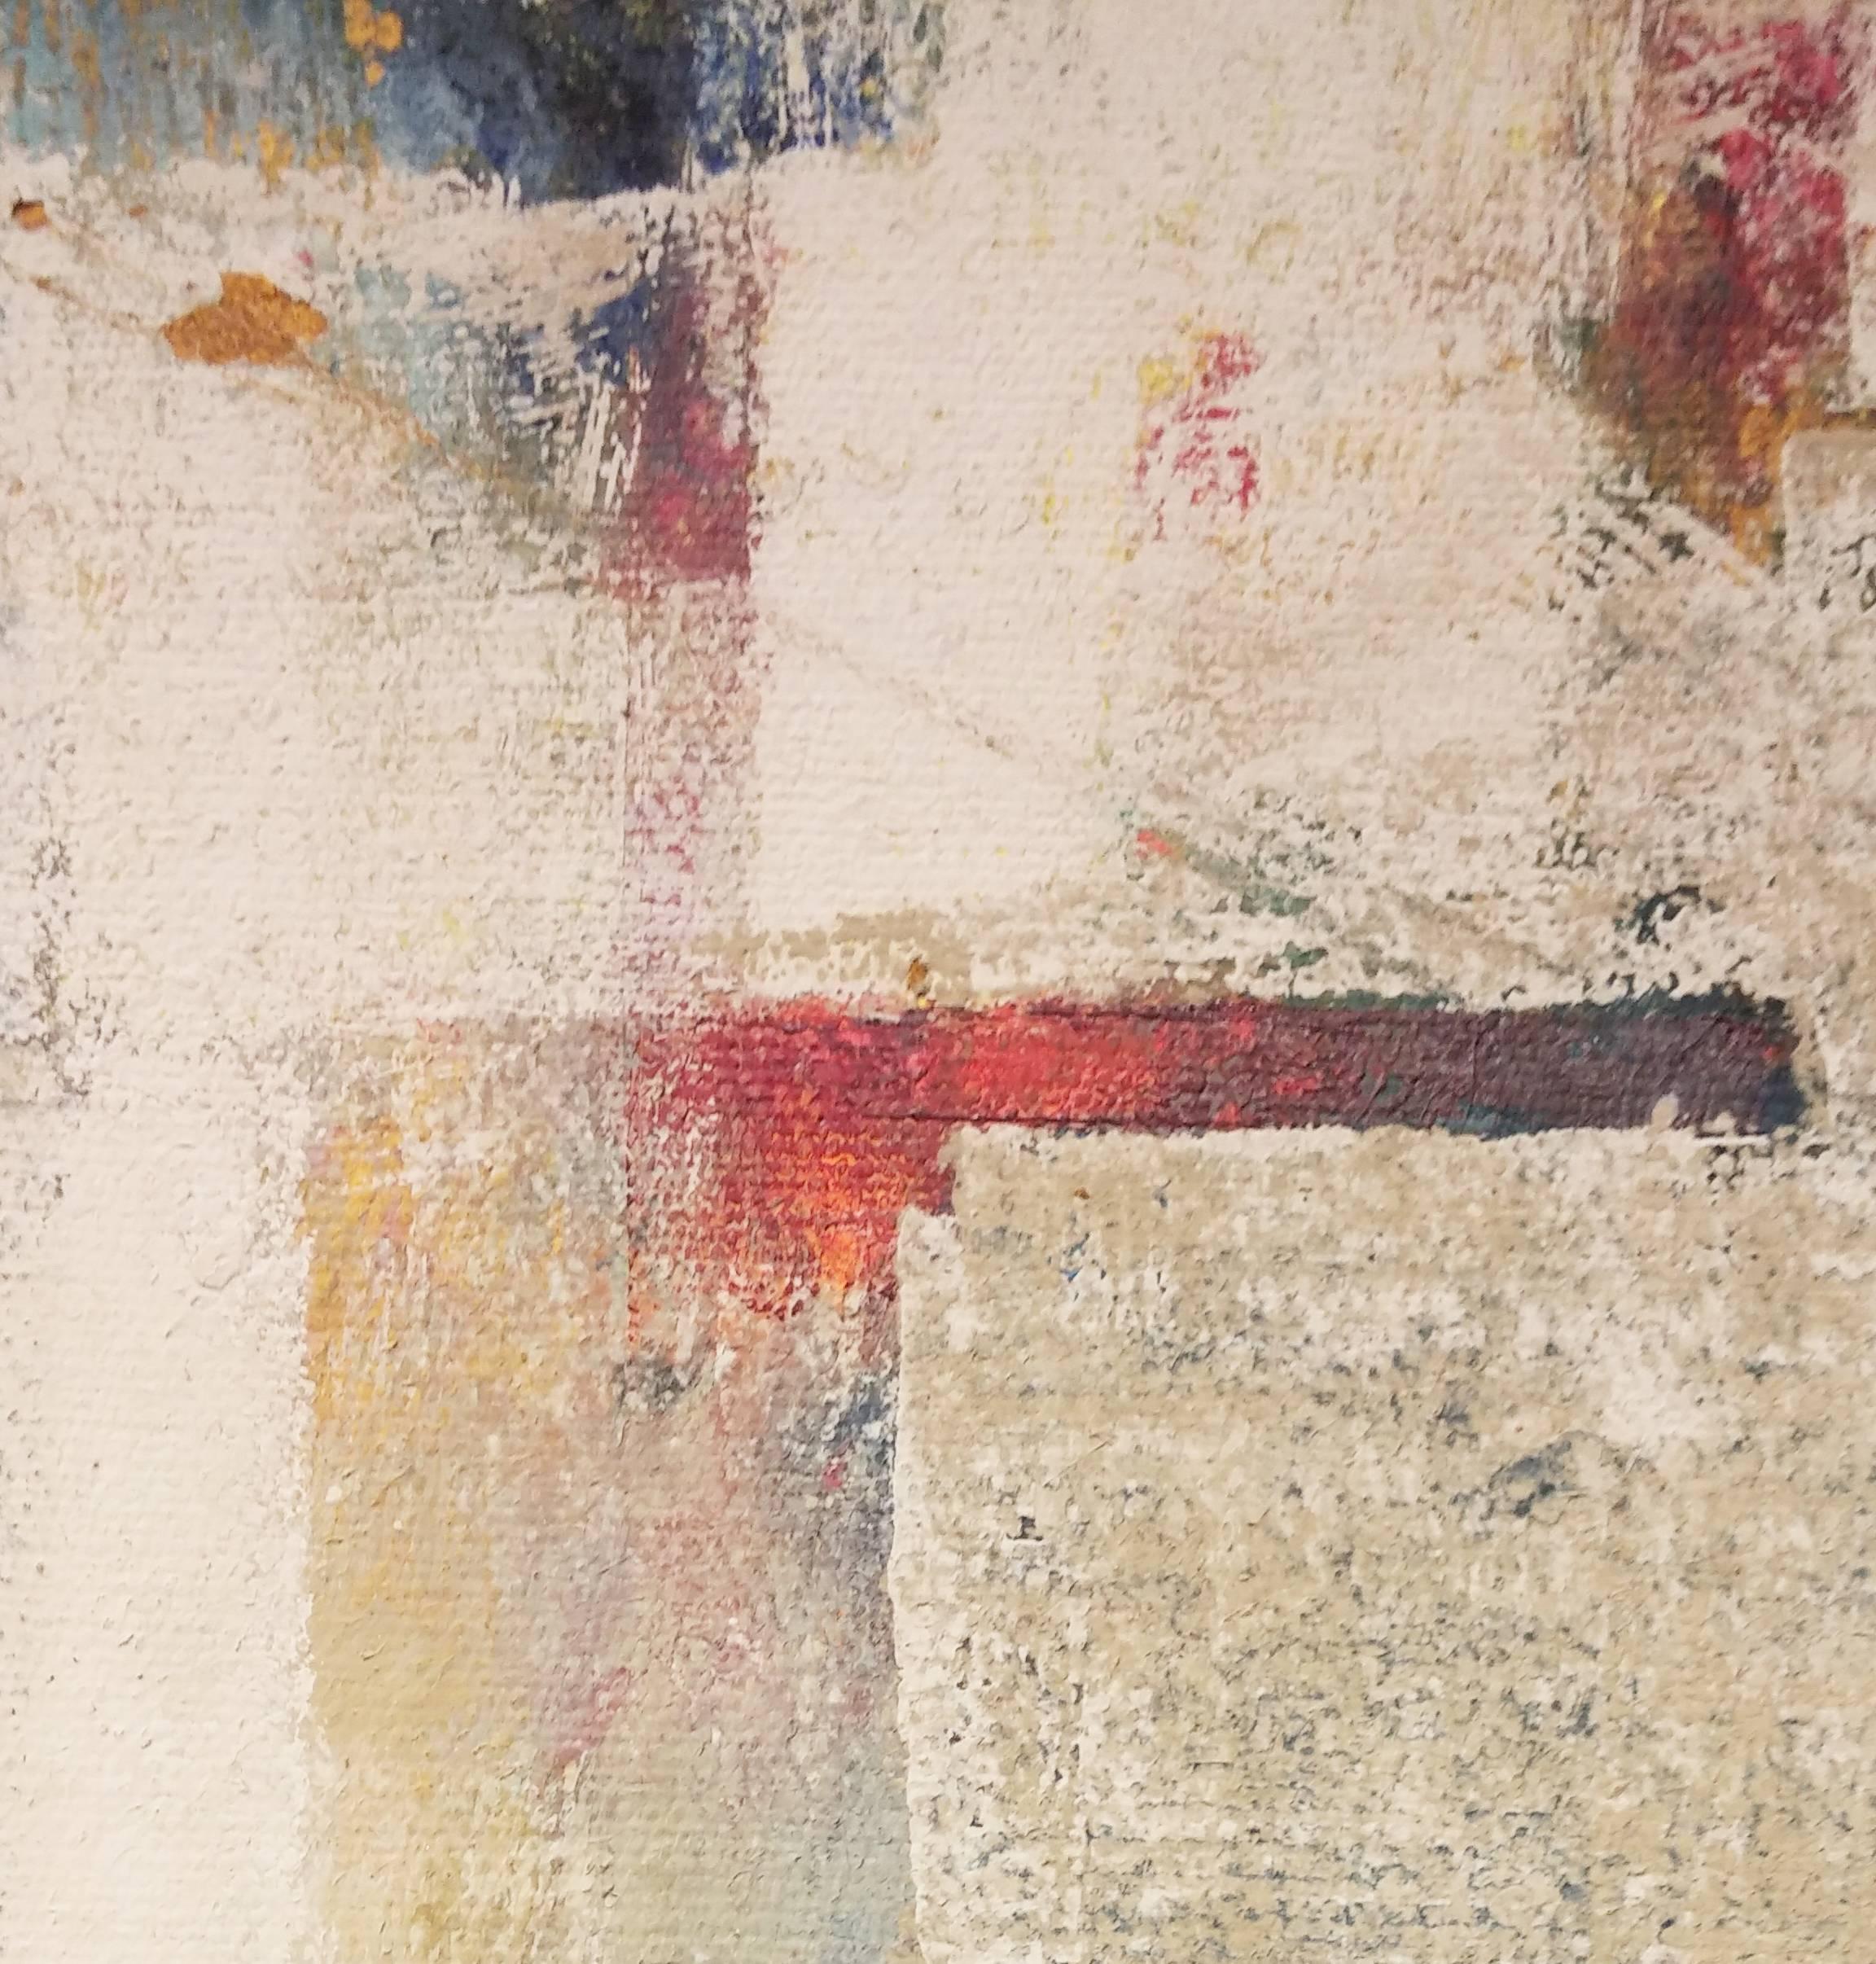 This untitled artwork by Stanley Bate was created circa 1960. It is a Modern abstract oil painting on canvas, featuring an earthy palette of sandy brown and umber, light blue, muted green, and a few pops of deep red. The piece is at once geometric